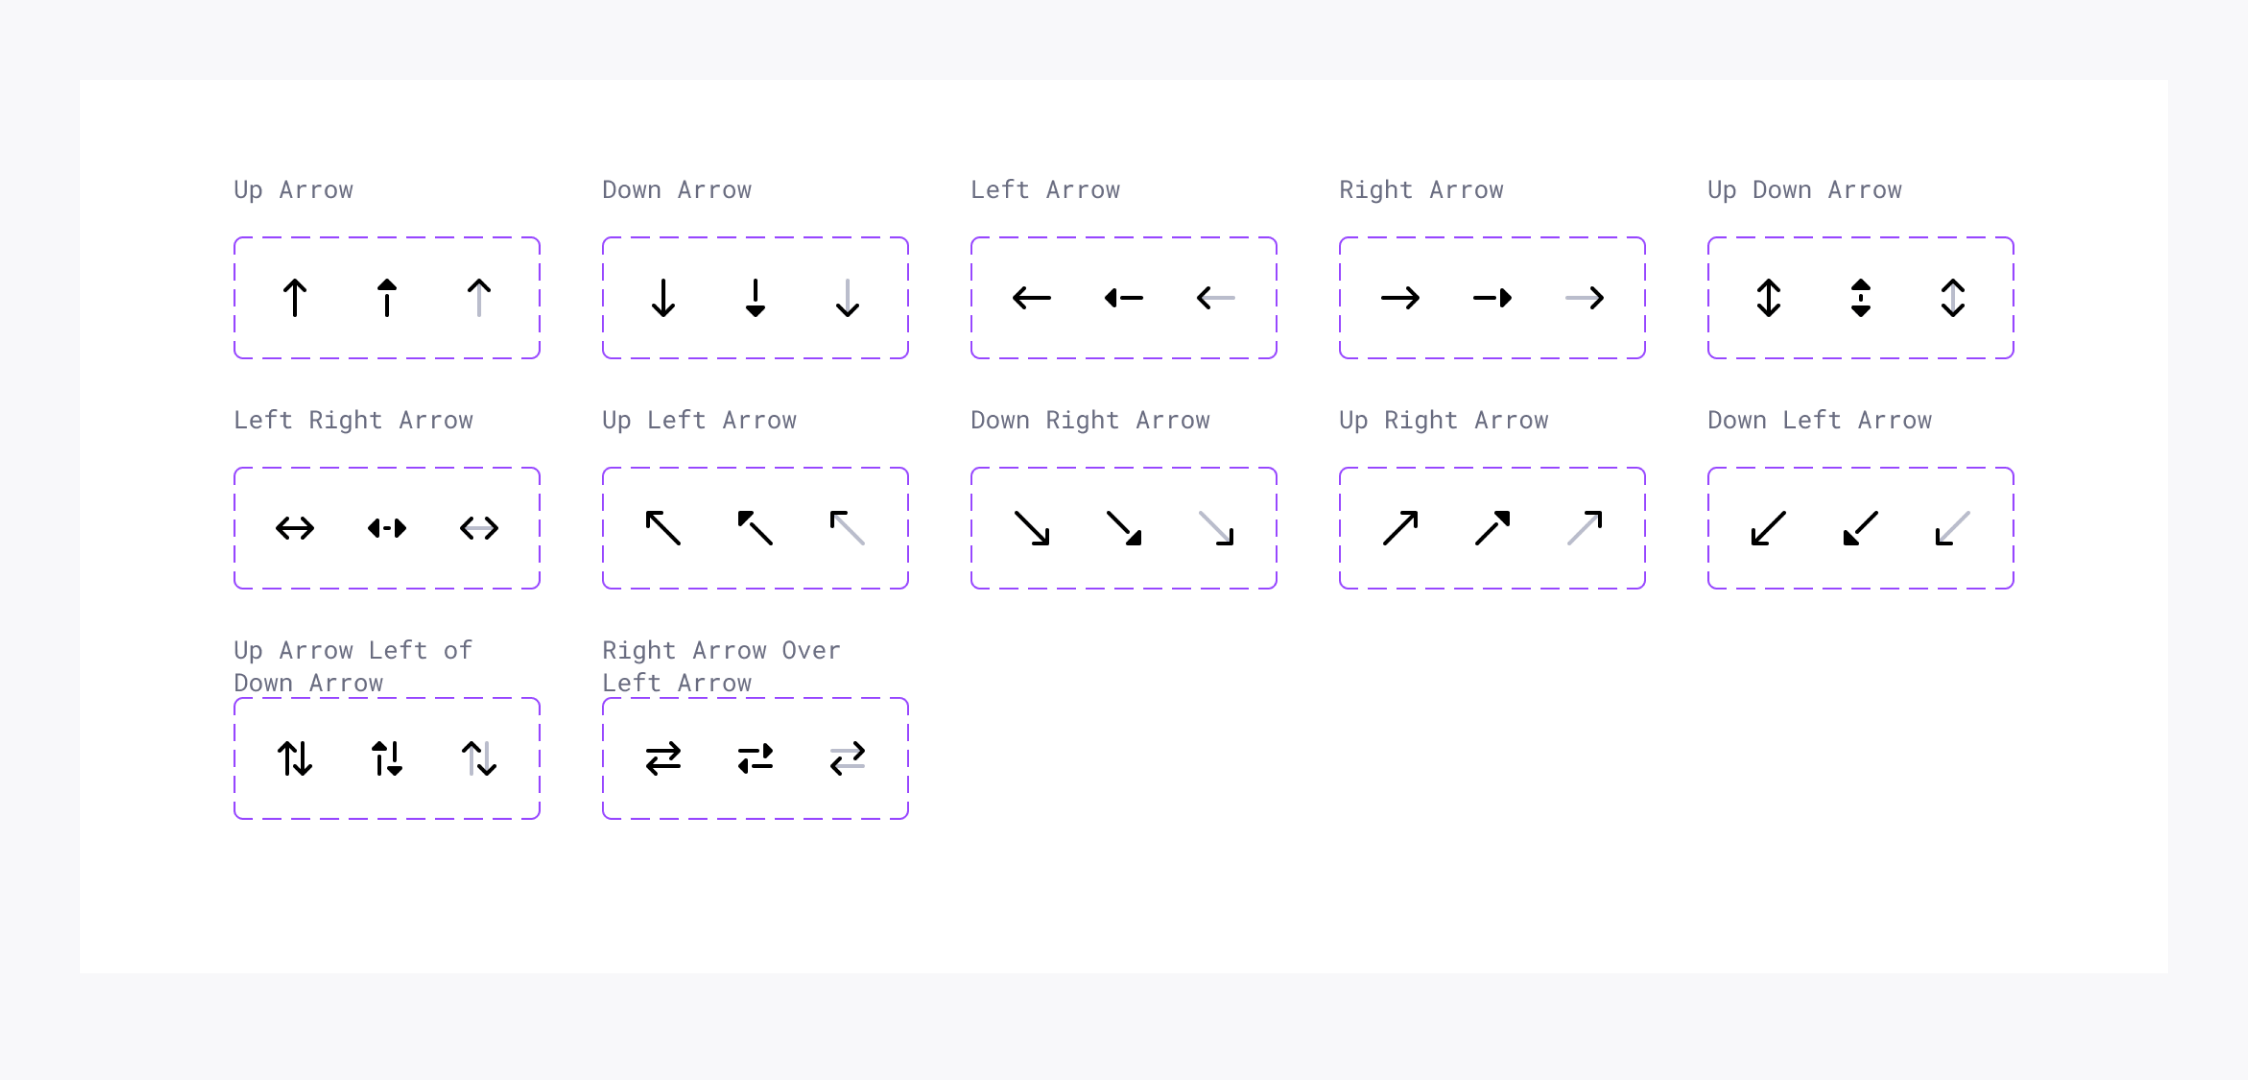 Arrows icon set in Universal Icon Set in Figma. A set of arrow symbols grouped by direction, including up, down, left, right, and diagonal arrows, with variations for each direction.